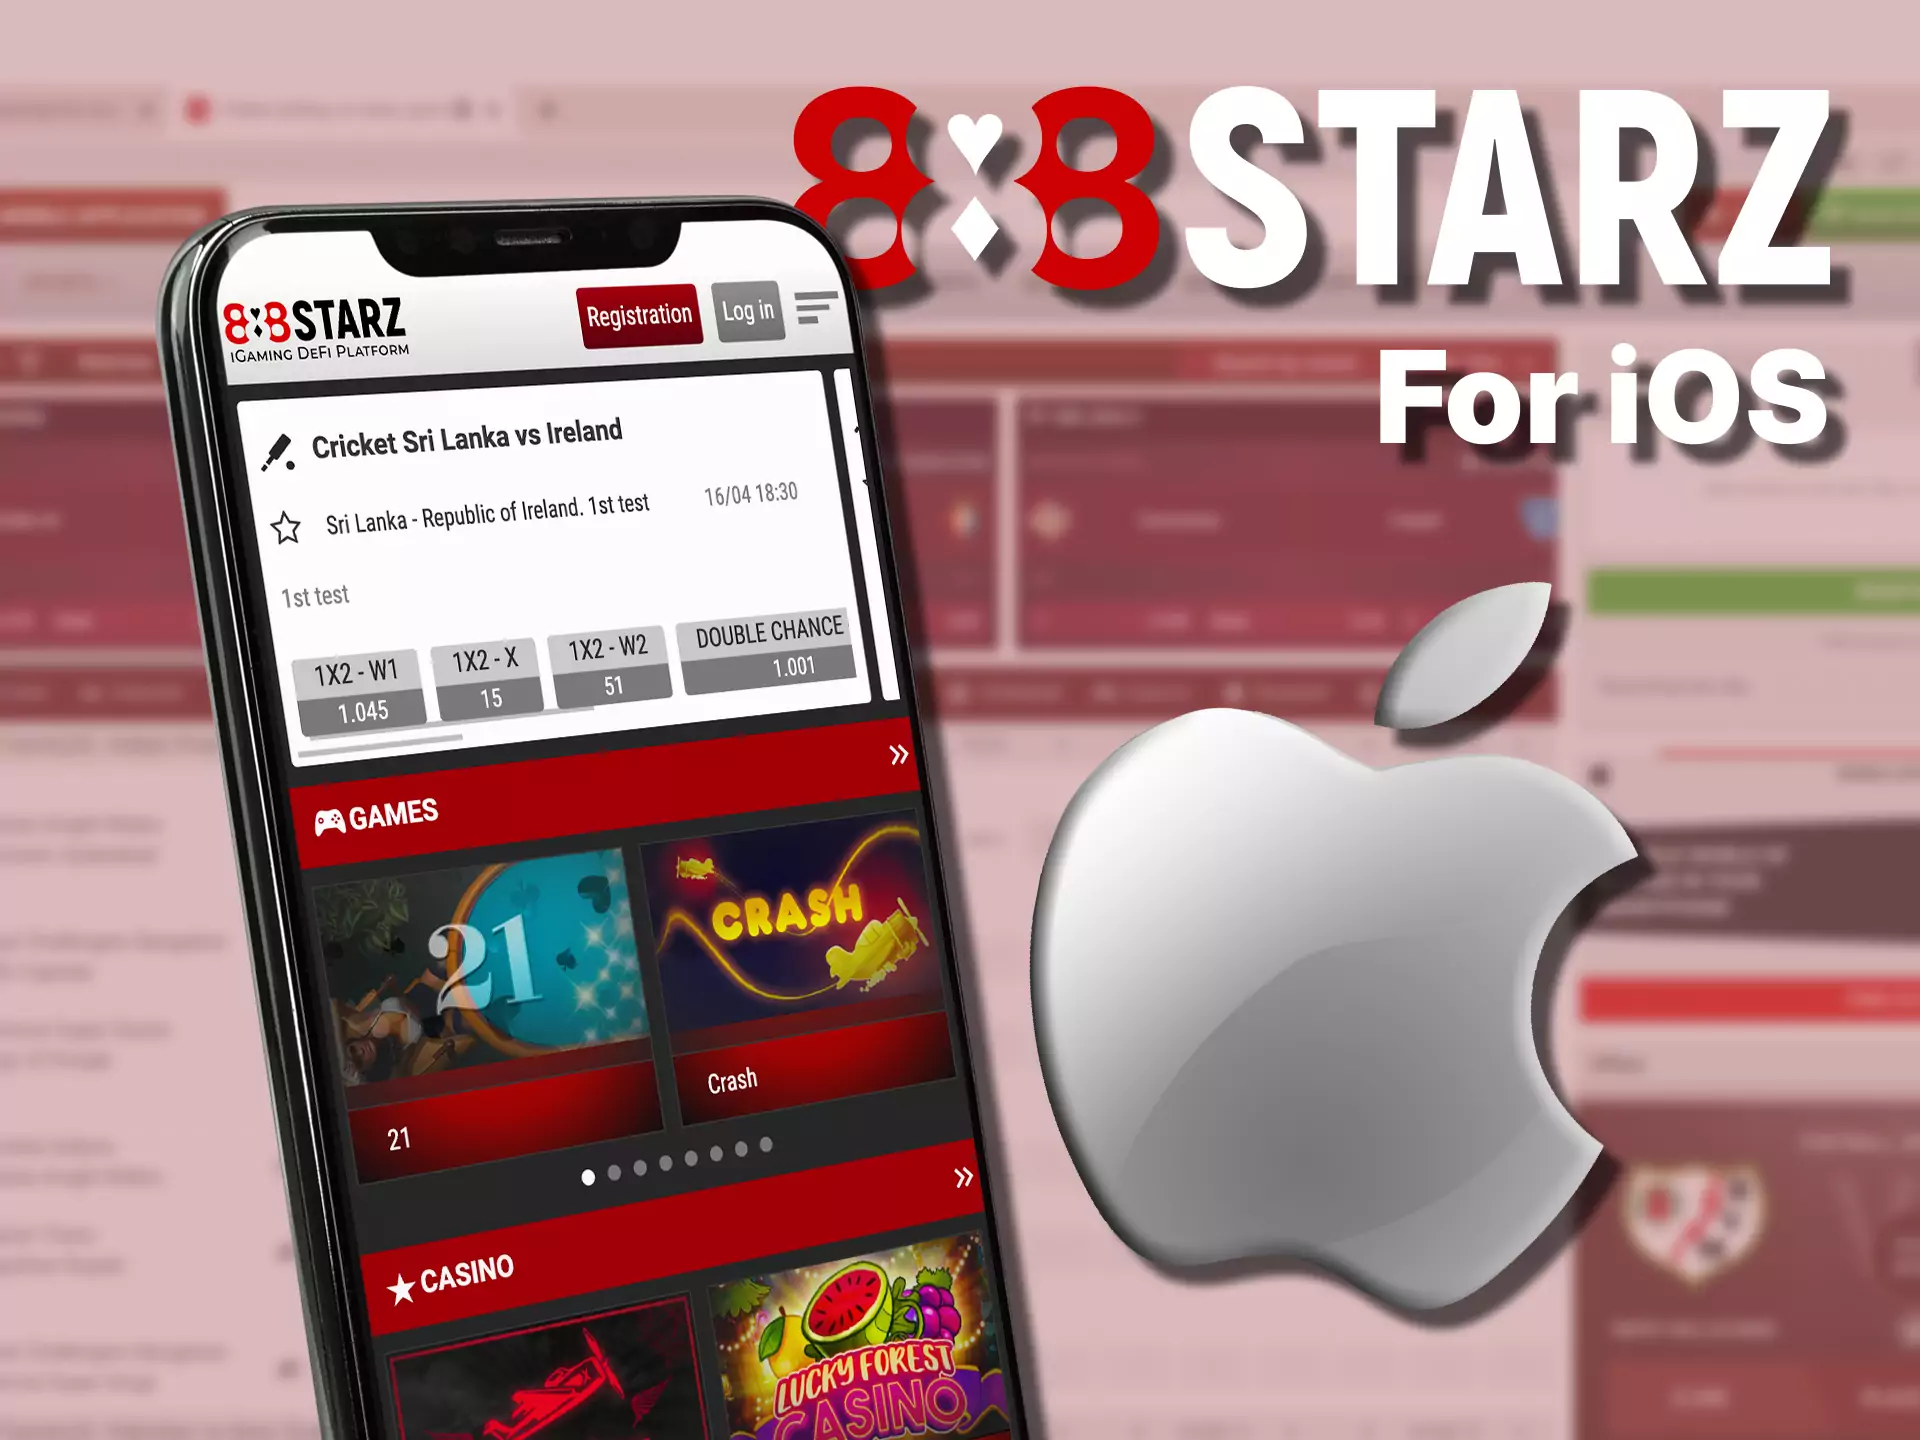 888starz app can be installed on your phone with iOS system.